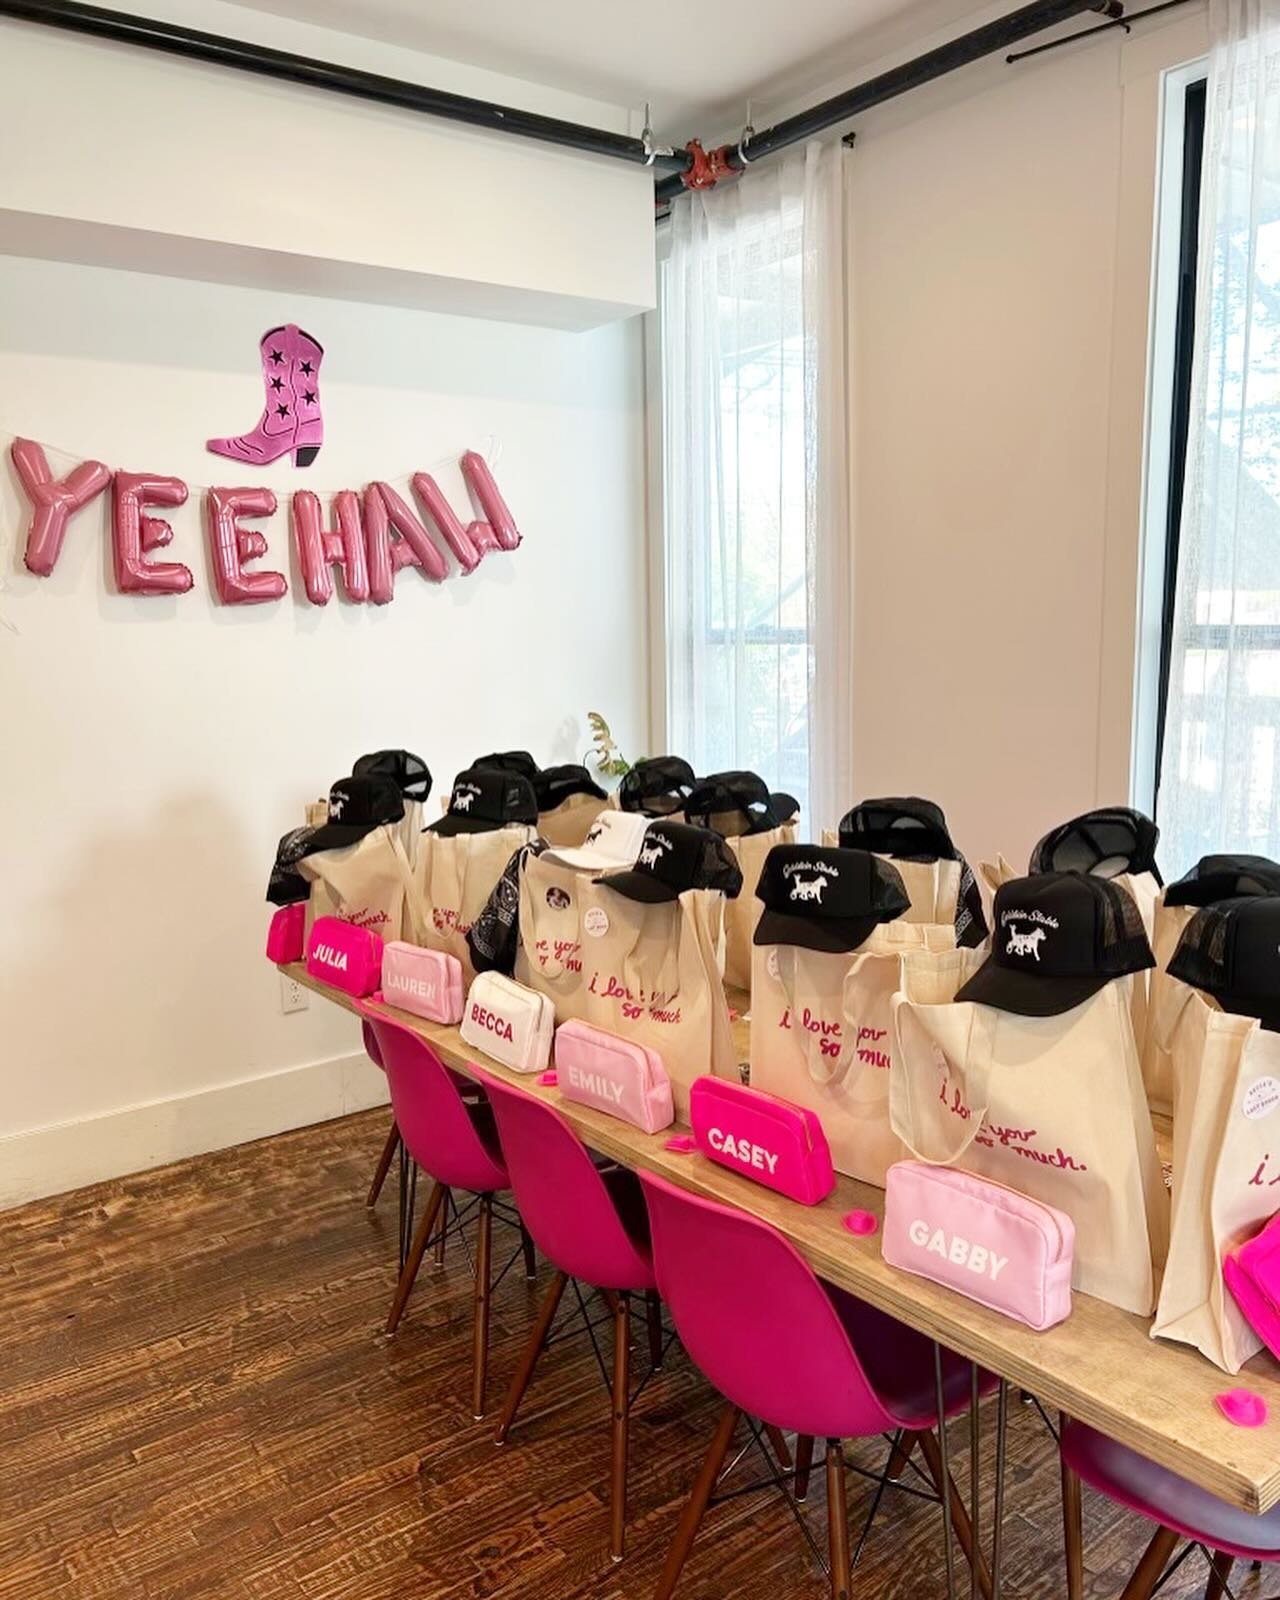 another amazing weekend in AUSTIN! 🤠 We made all these fun goodies for @becca_duberman &lsquo;s bachelorette with help from her amazing sister @emilyduberman &mdash; custom totes, trucker hats, pouches &amp; comfy tees for the most perfect weekend a